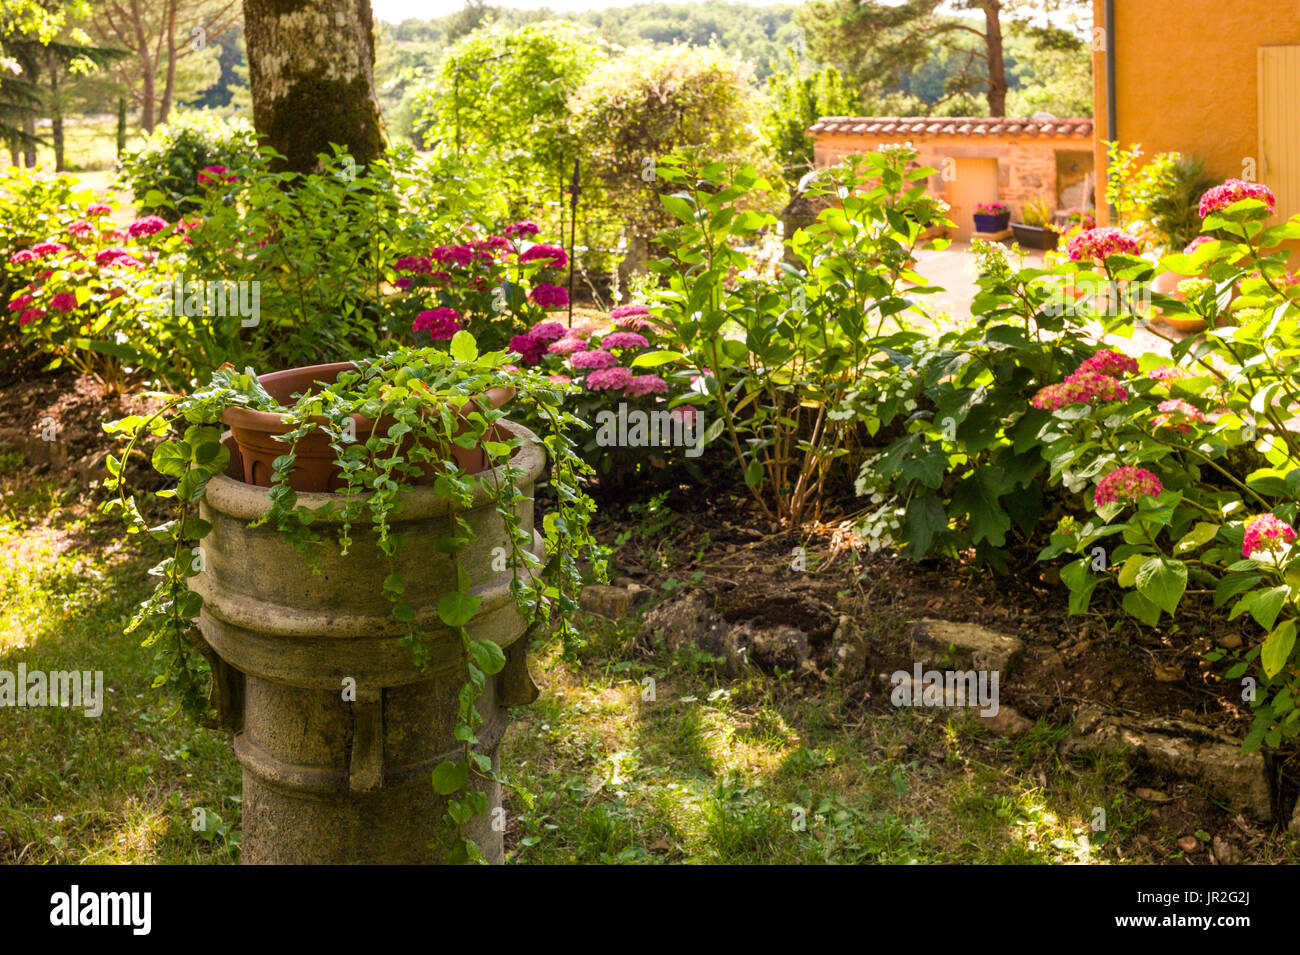 Stone plinth in old French country garden Stock Photo